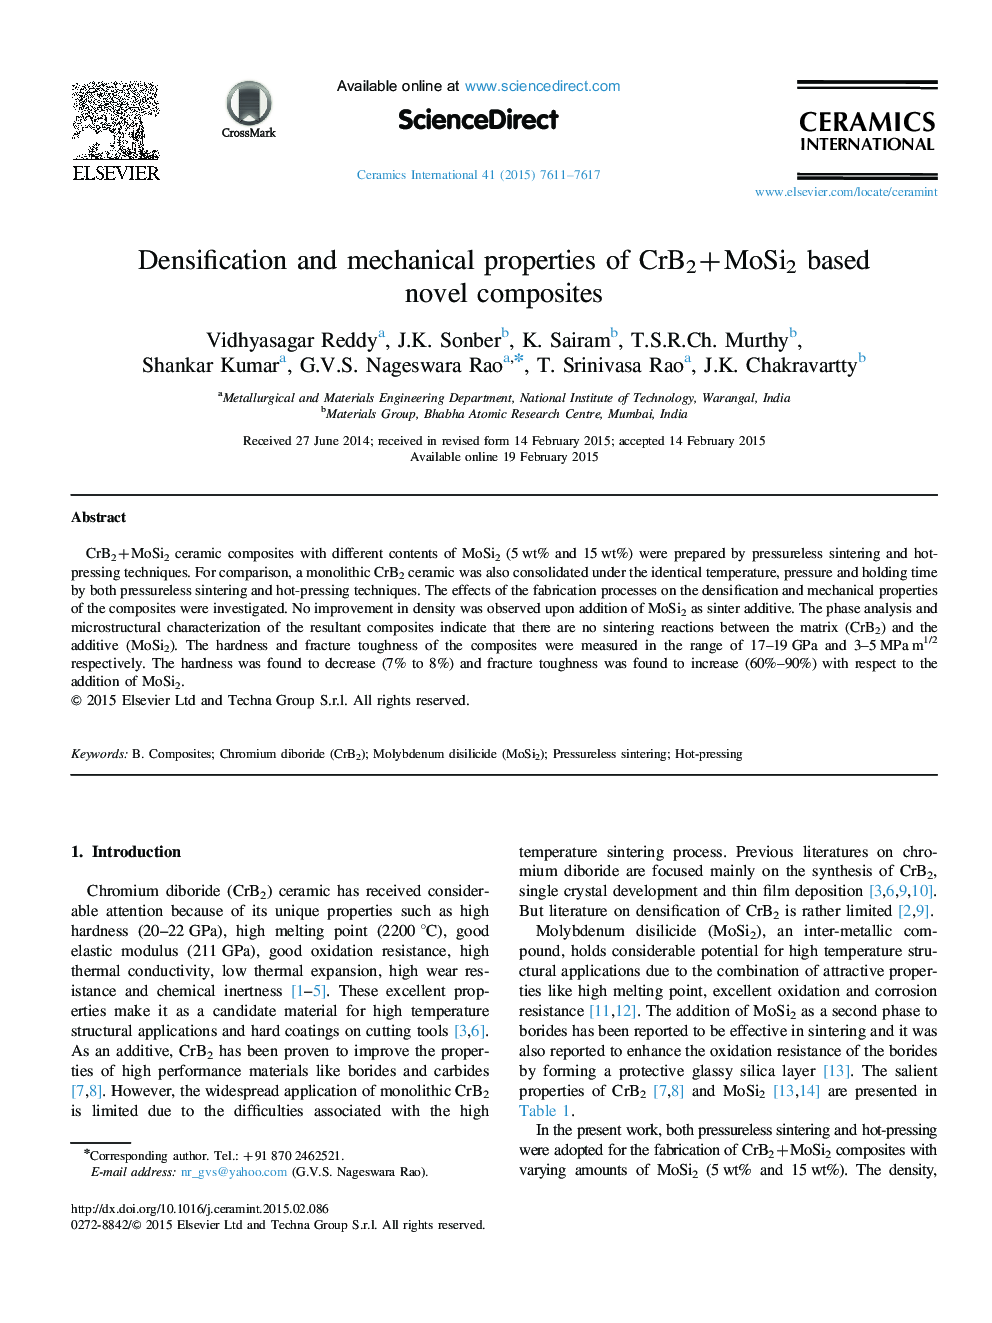 Densification and mechanical properties of CrB2+MoSi2 based novel composites